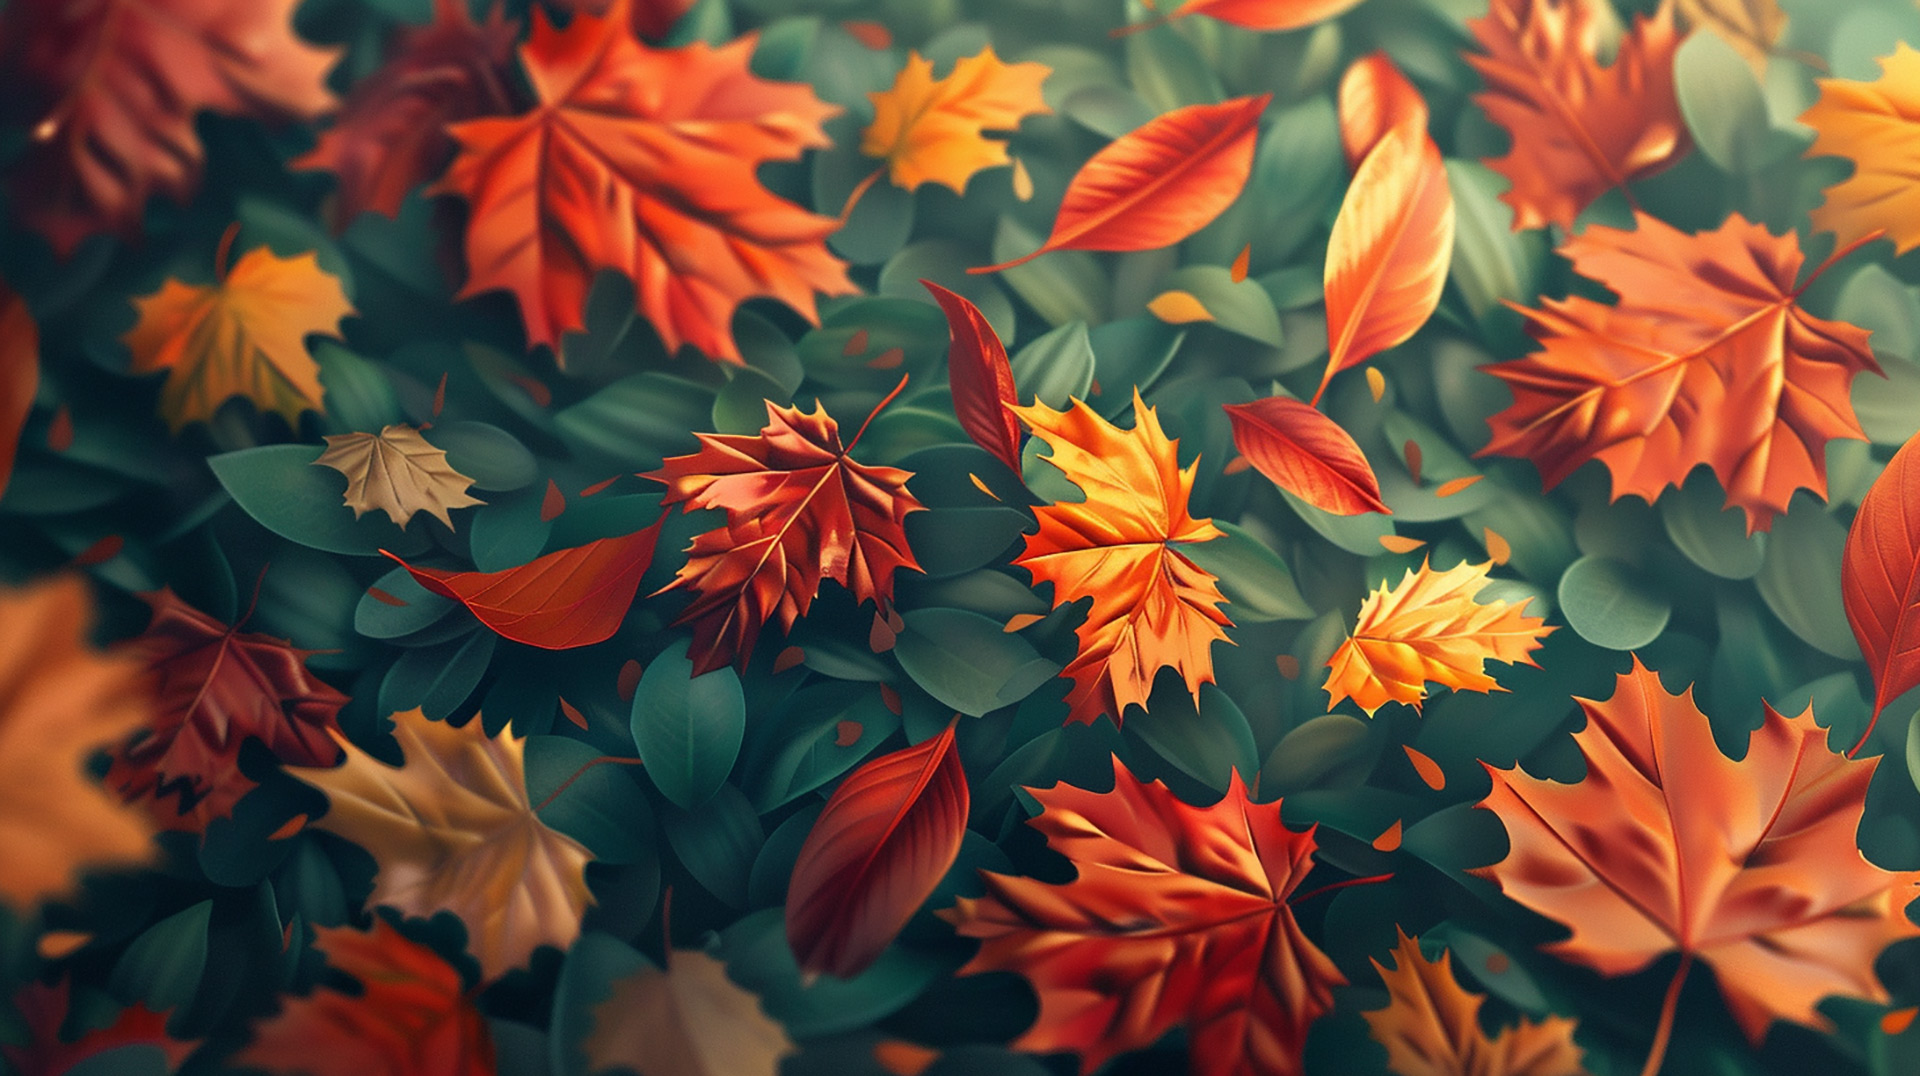 Amber Cascade: Autumn Leaves in Motion